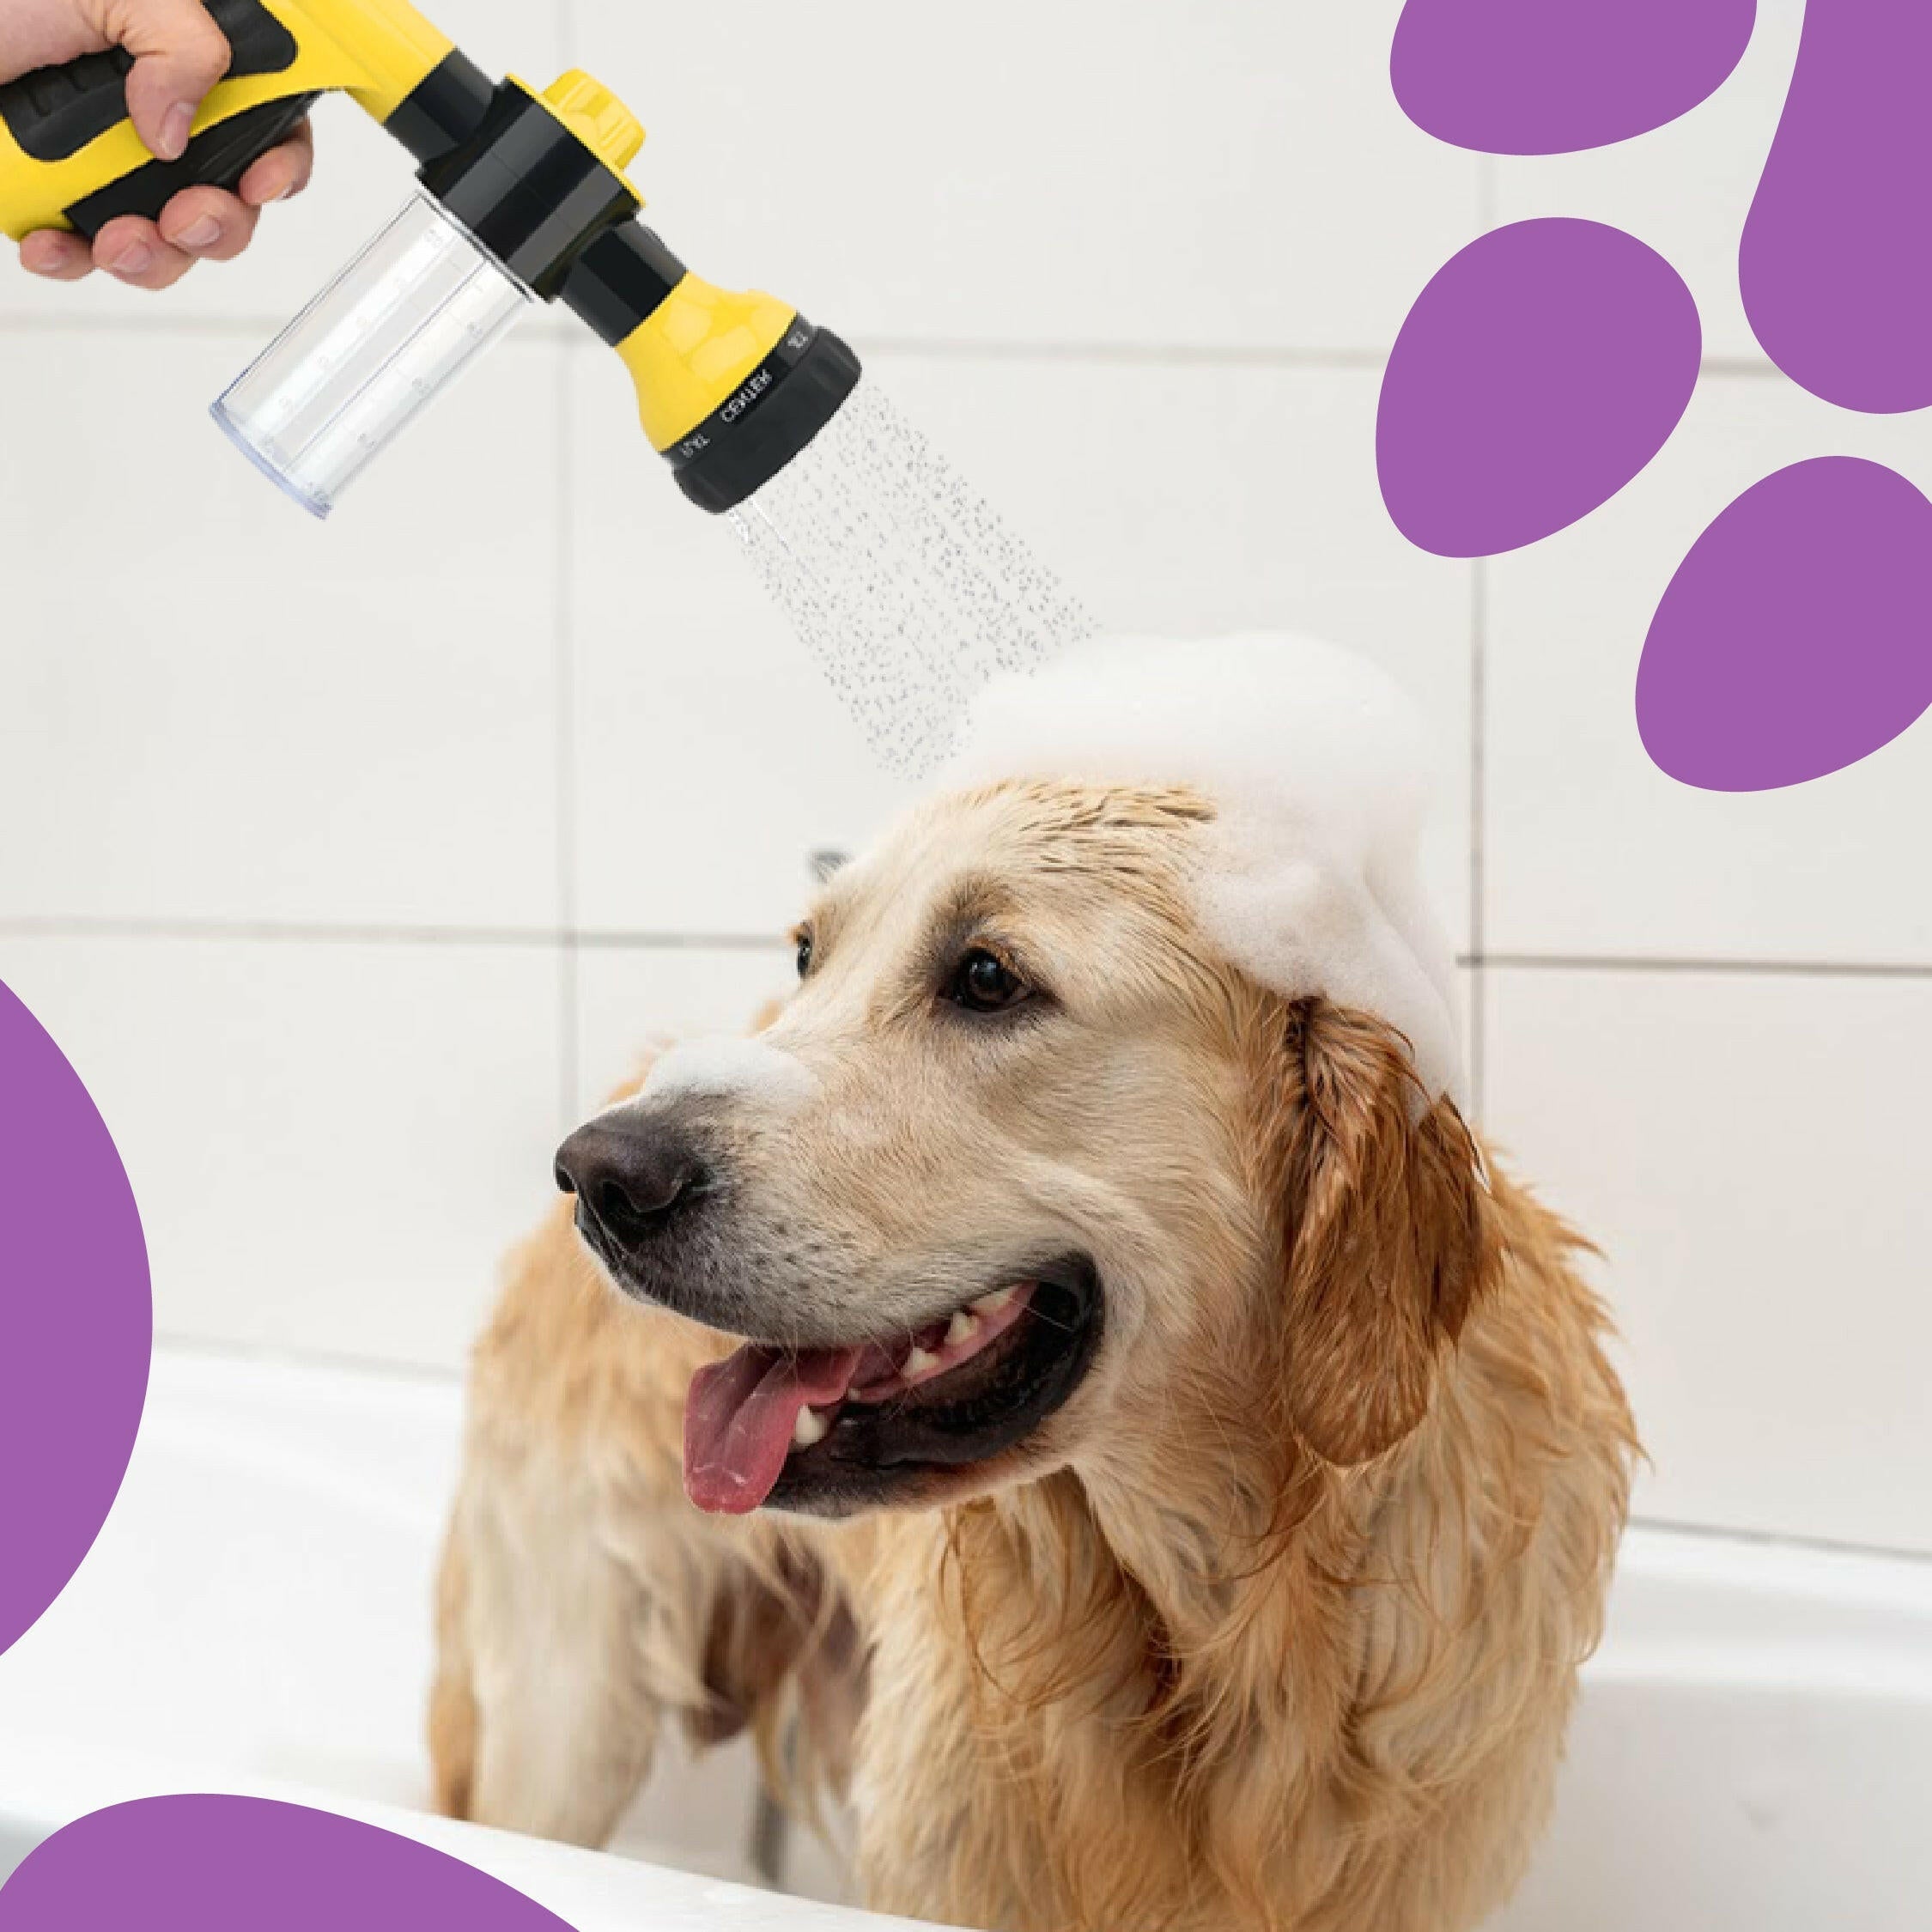 Hose Sprayer Nozzle for Pet Bath and Adjustable 3 Mode Cleaning! -  Free Shower Adapter Included